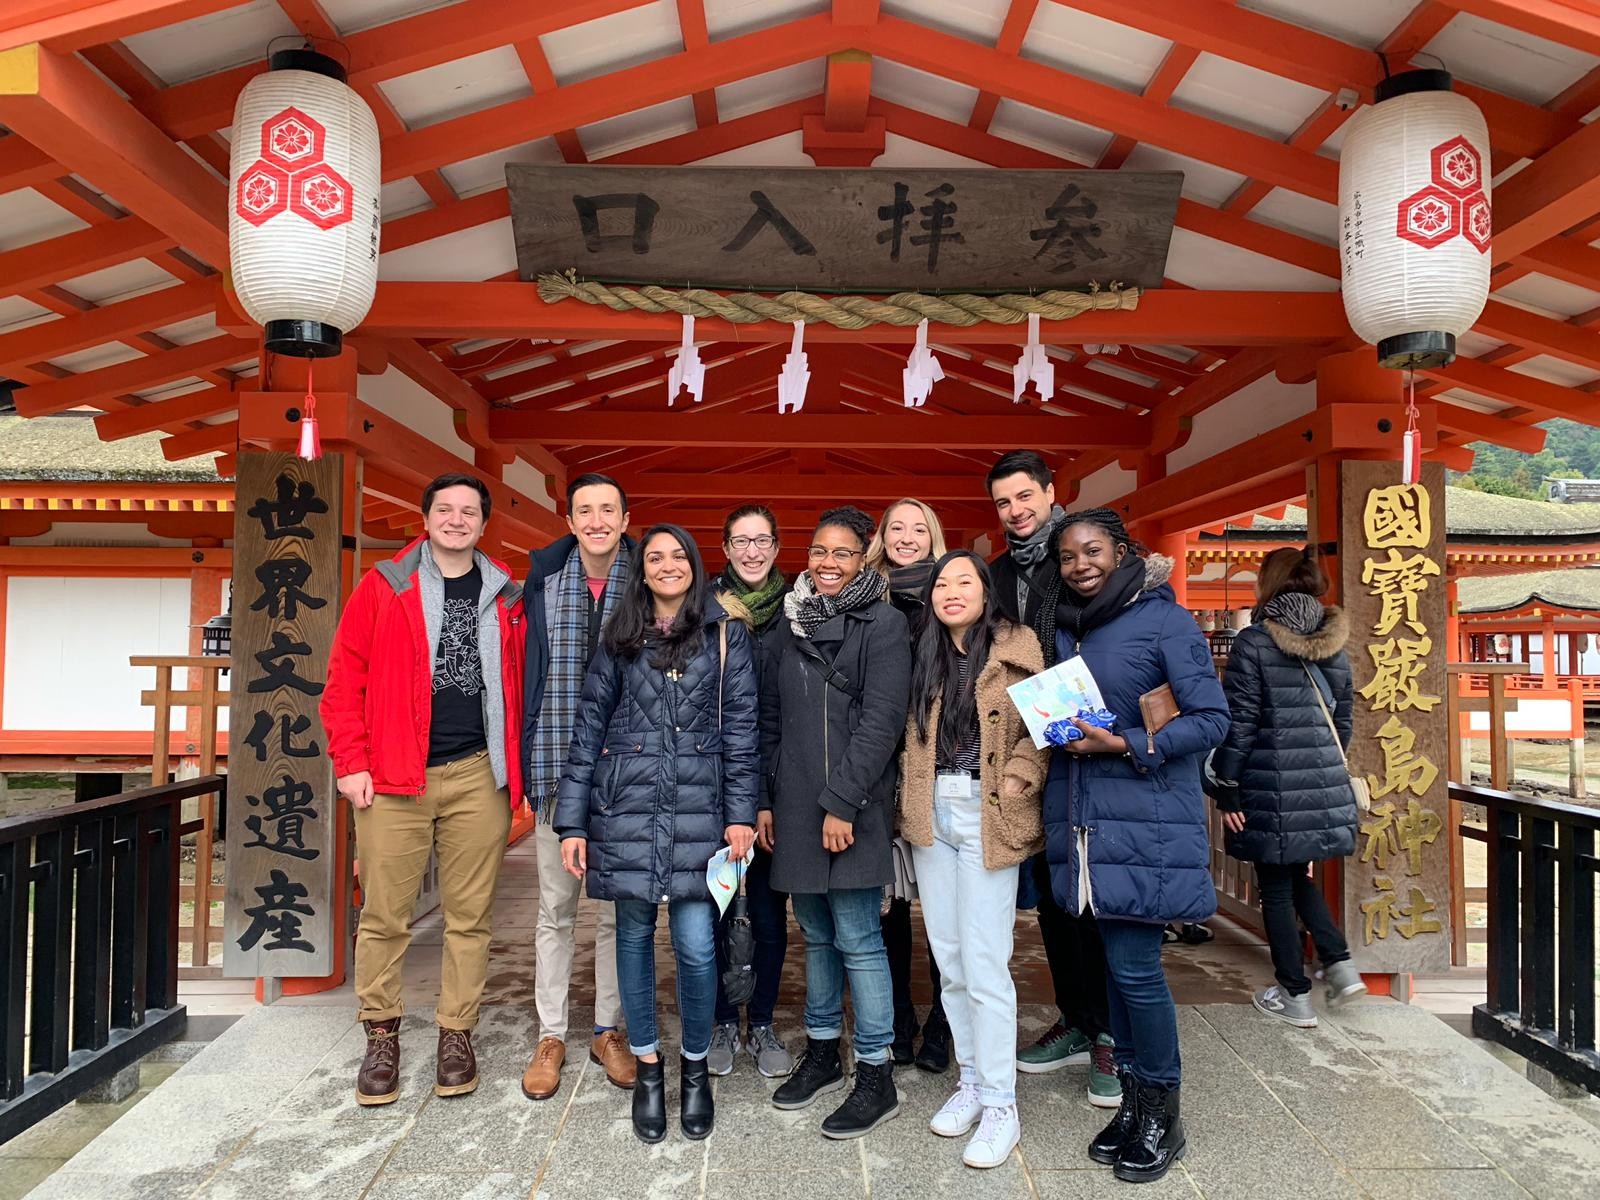 Penn students visiting a temple in Japan